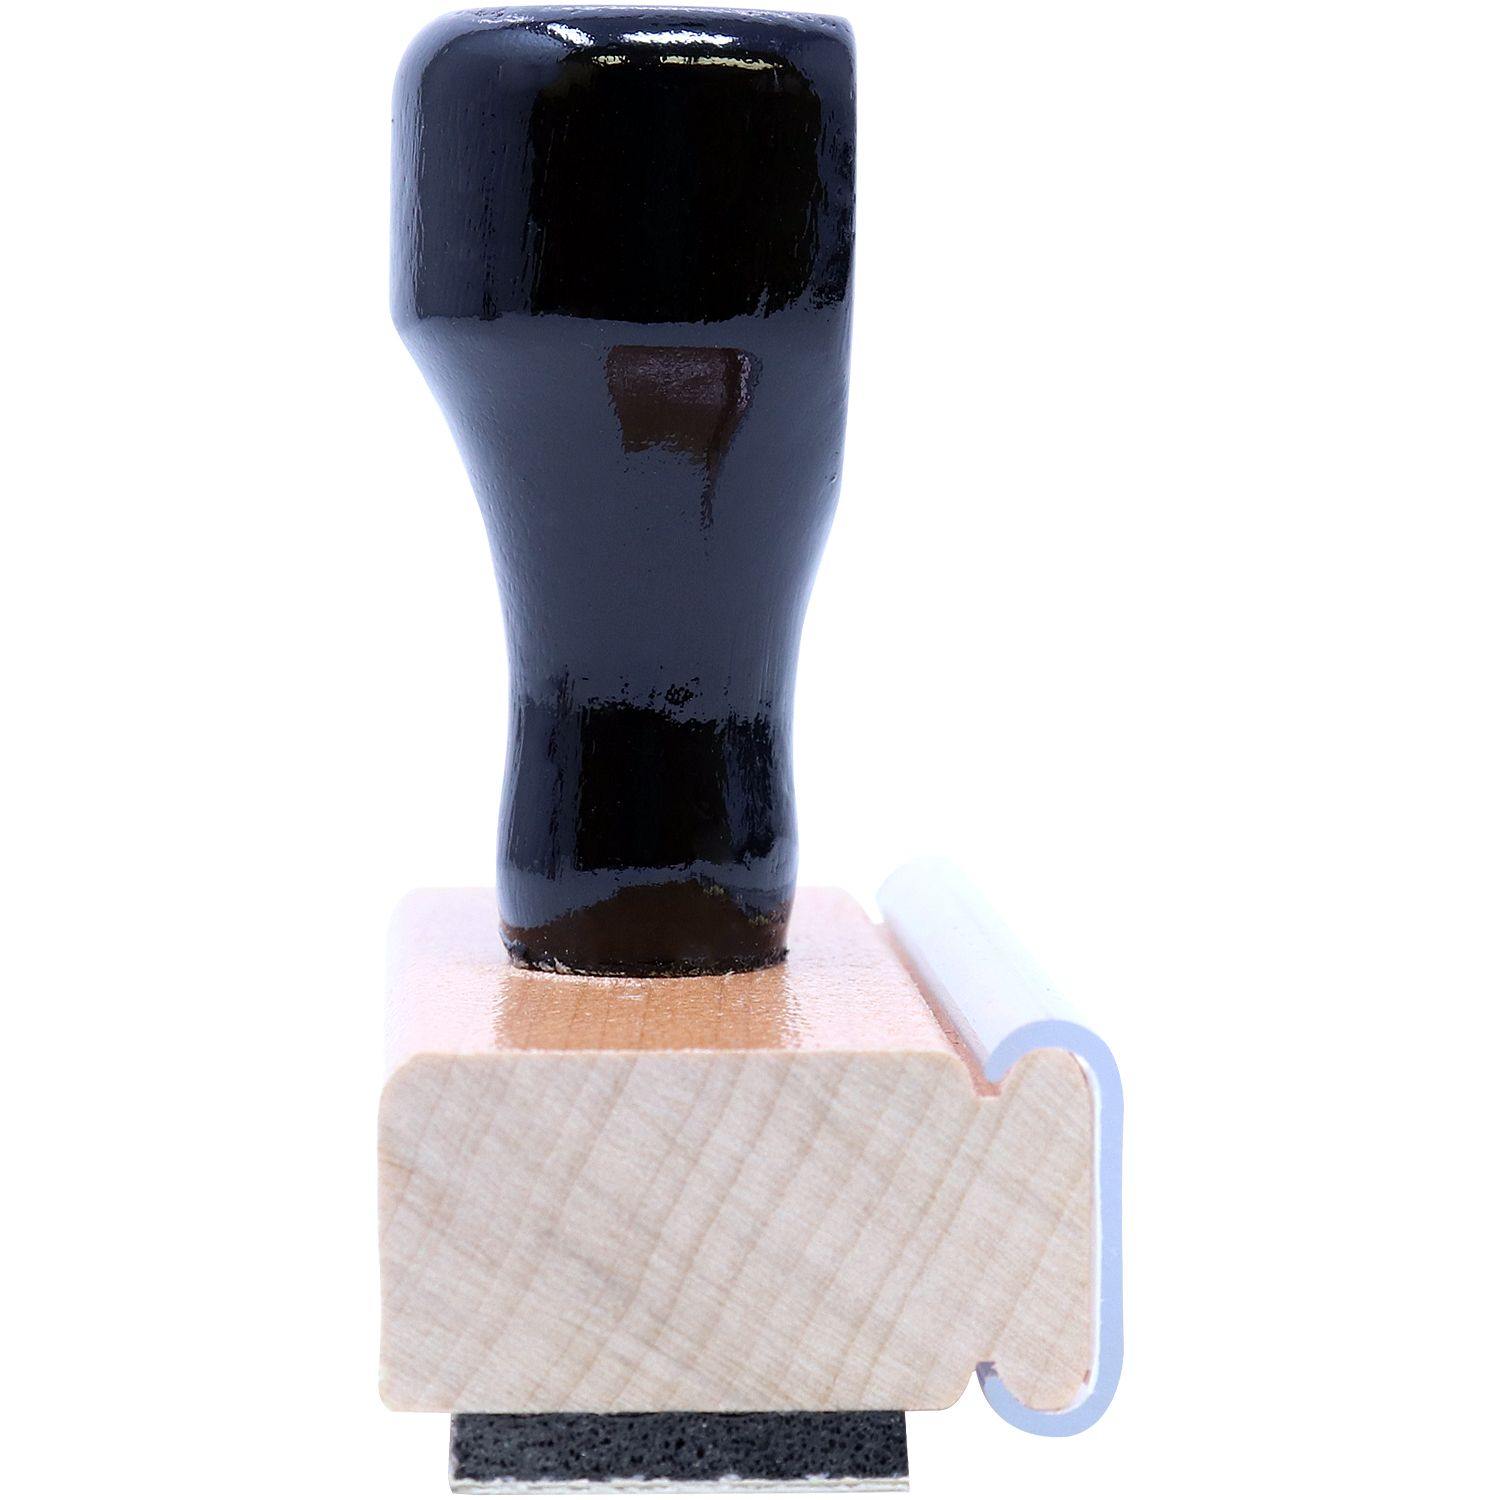 Outline Copy Rubber Stamp - Engineer Seal Stamps - Brand_Acorn, Impression Size_Small, Stamp Type_Regular Stamp, Type of Use_General, Type of Use_Office